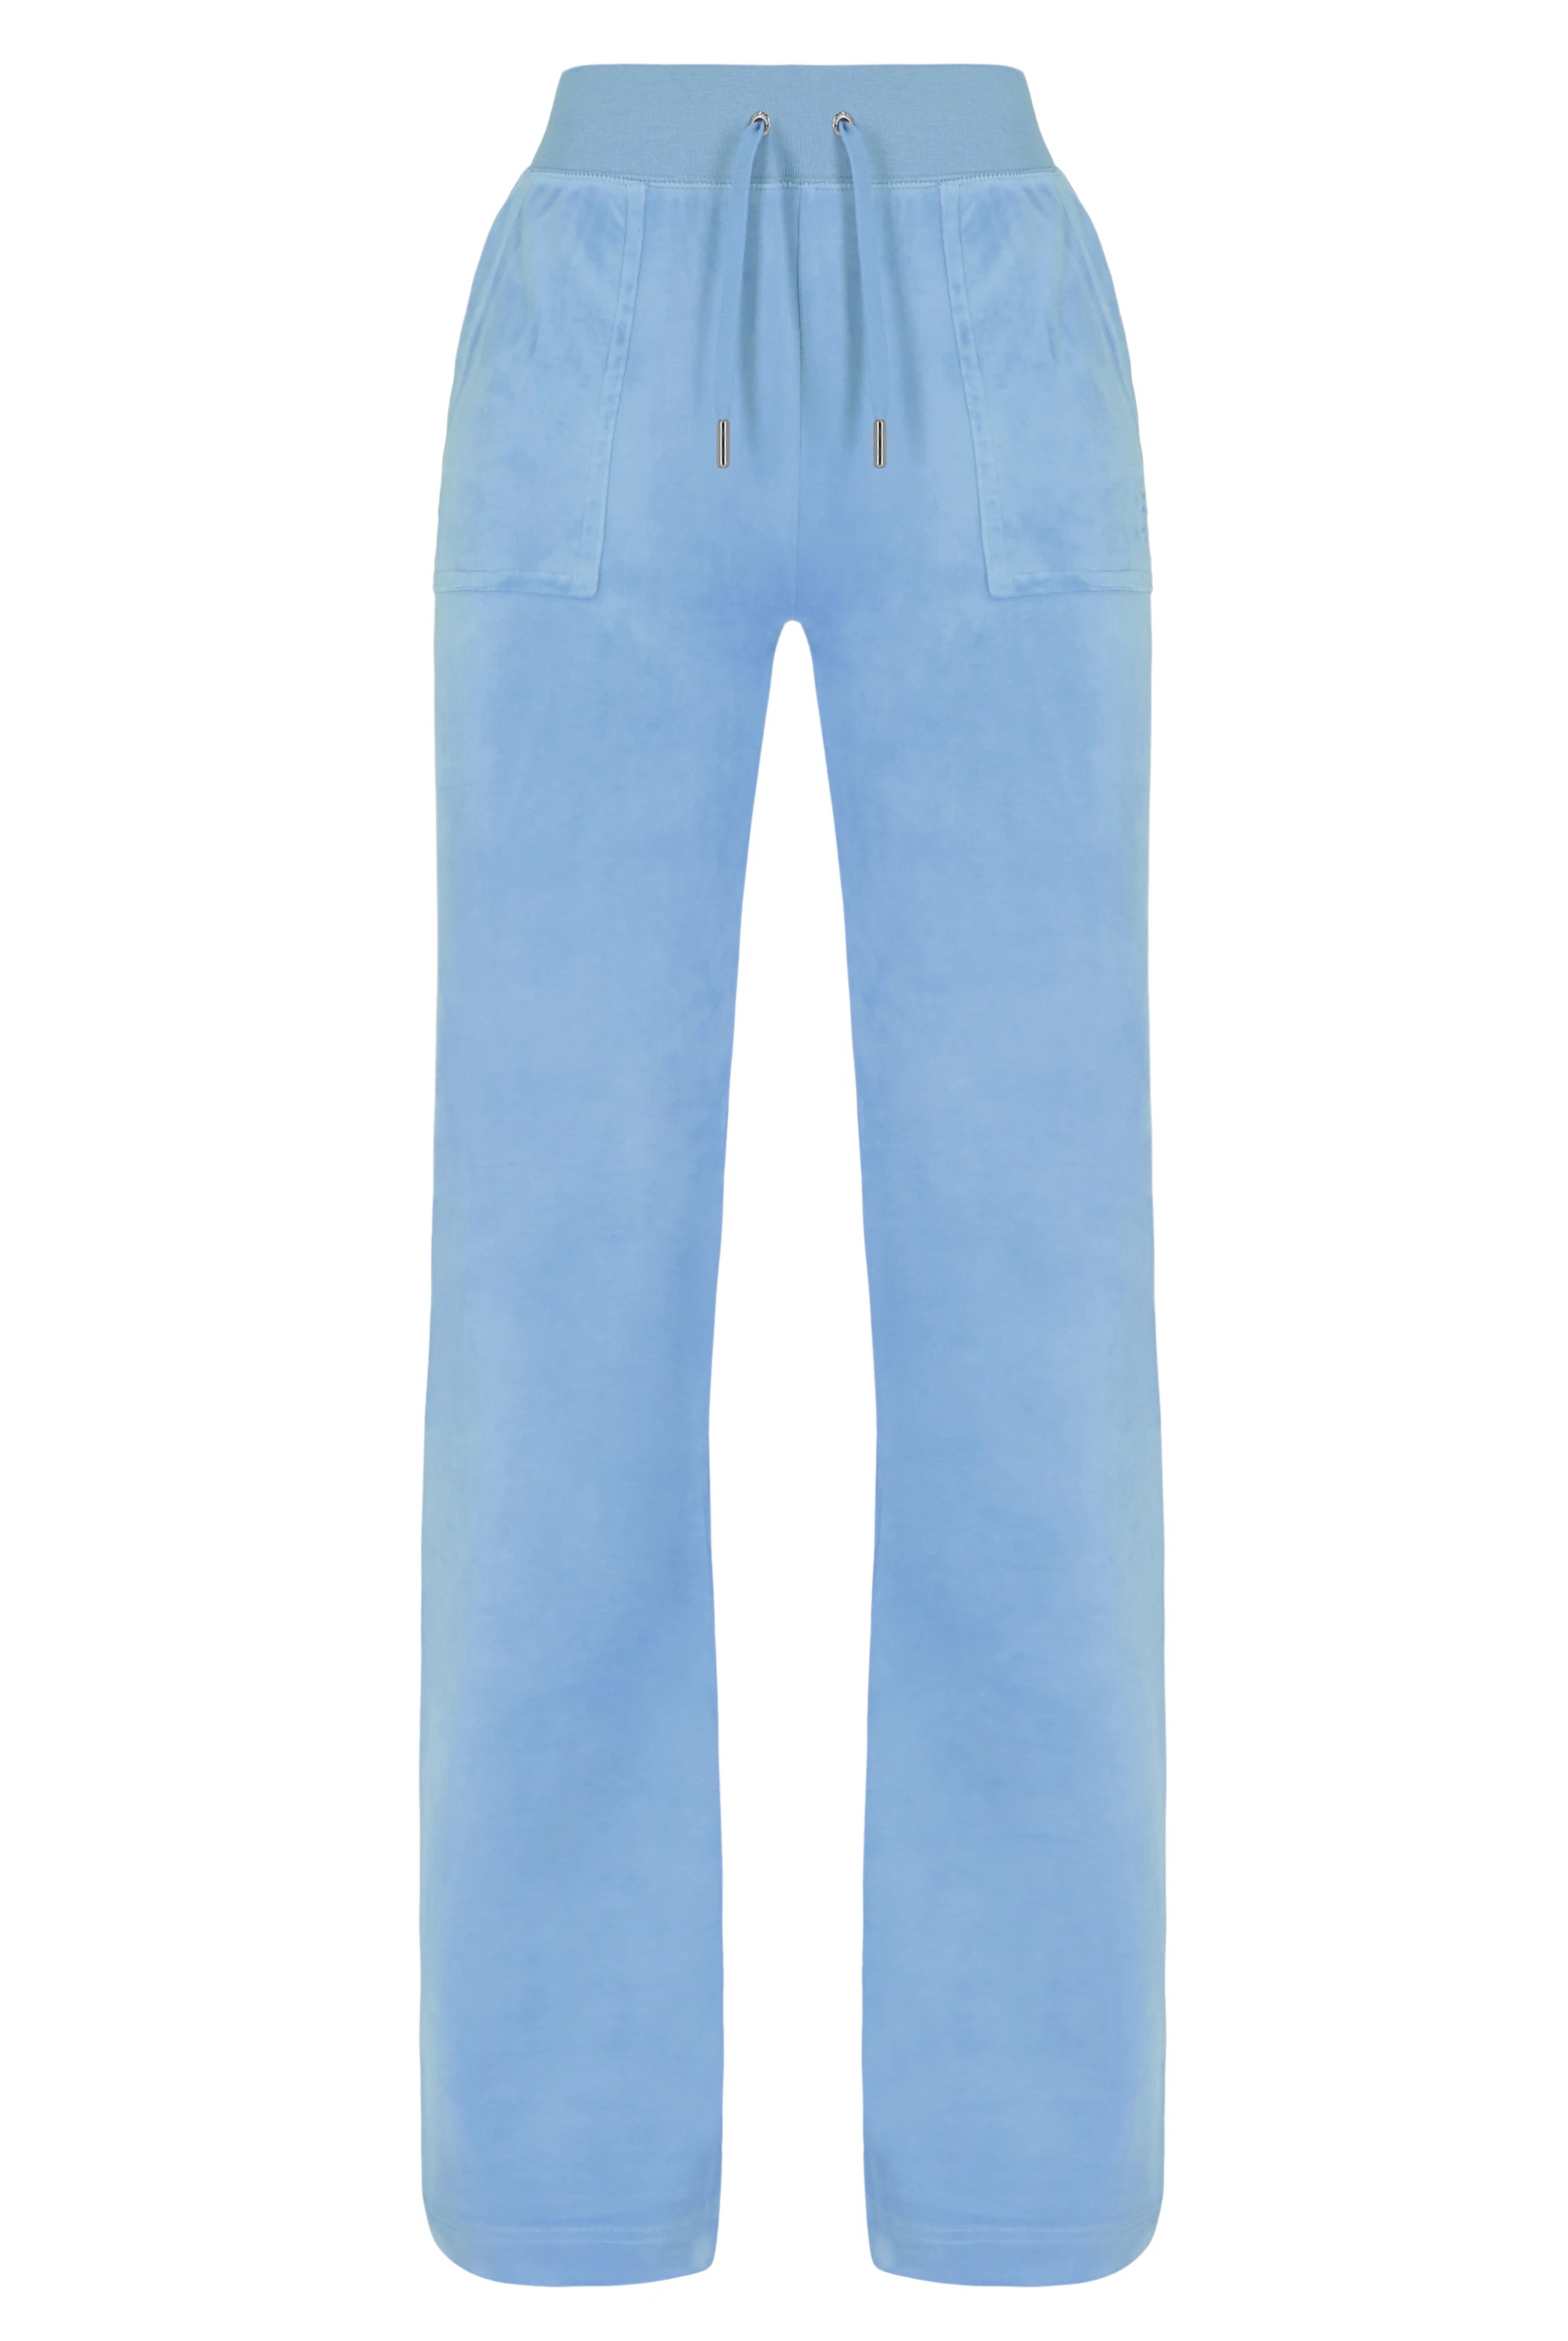 Juicy Couture Del Ray Classic Velour Pocketed Bottoms - Powder Blue